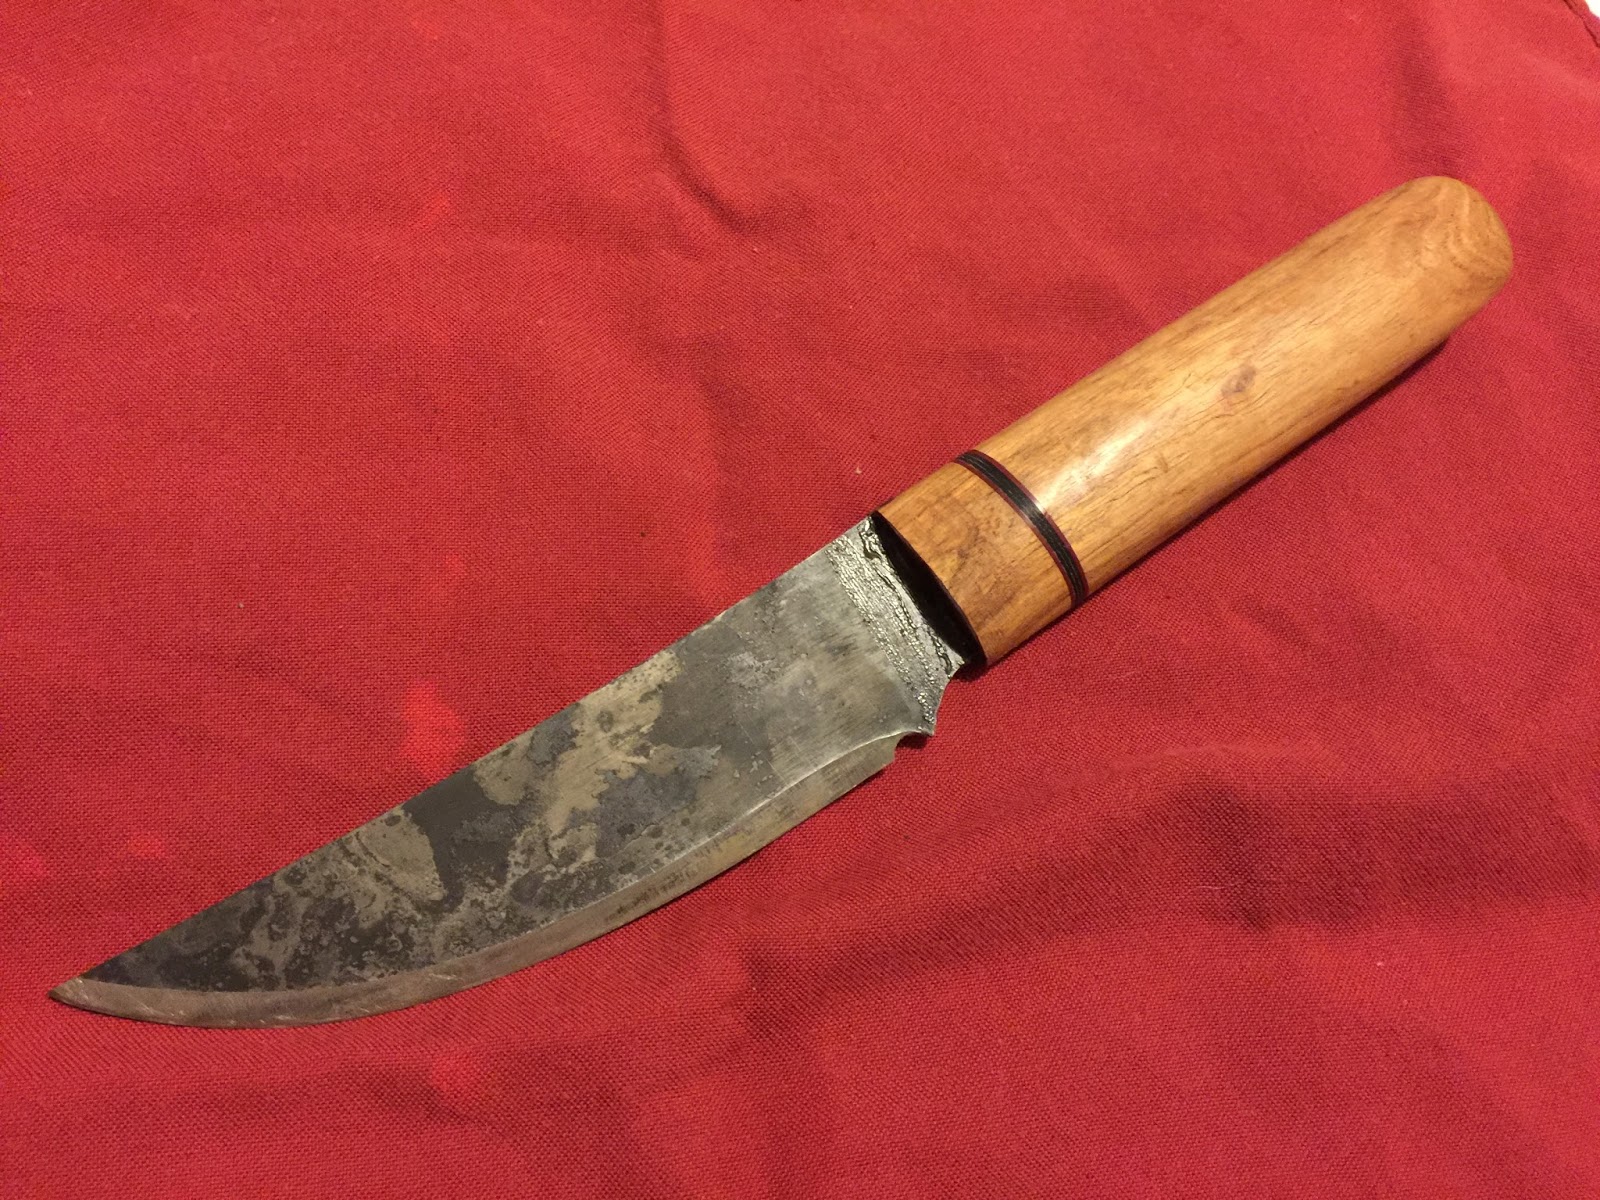 Woods Roamer: PHOTO GALLERY of HISTORICAL BUTCHER, SLICING AND BONING KNIVES